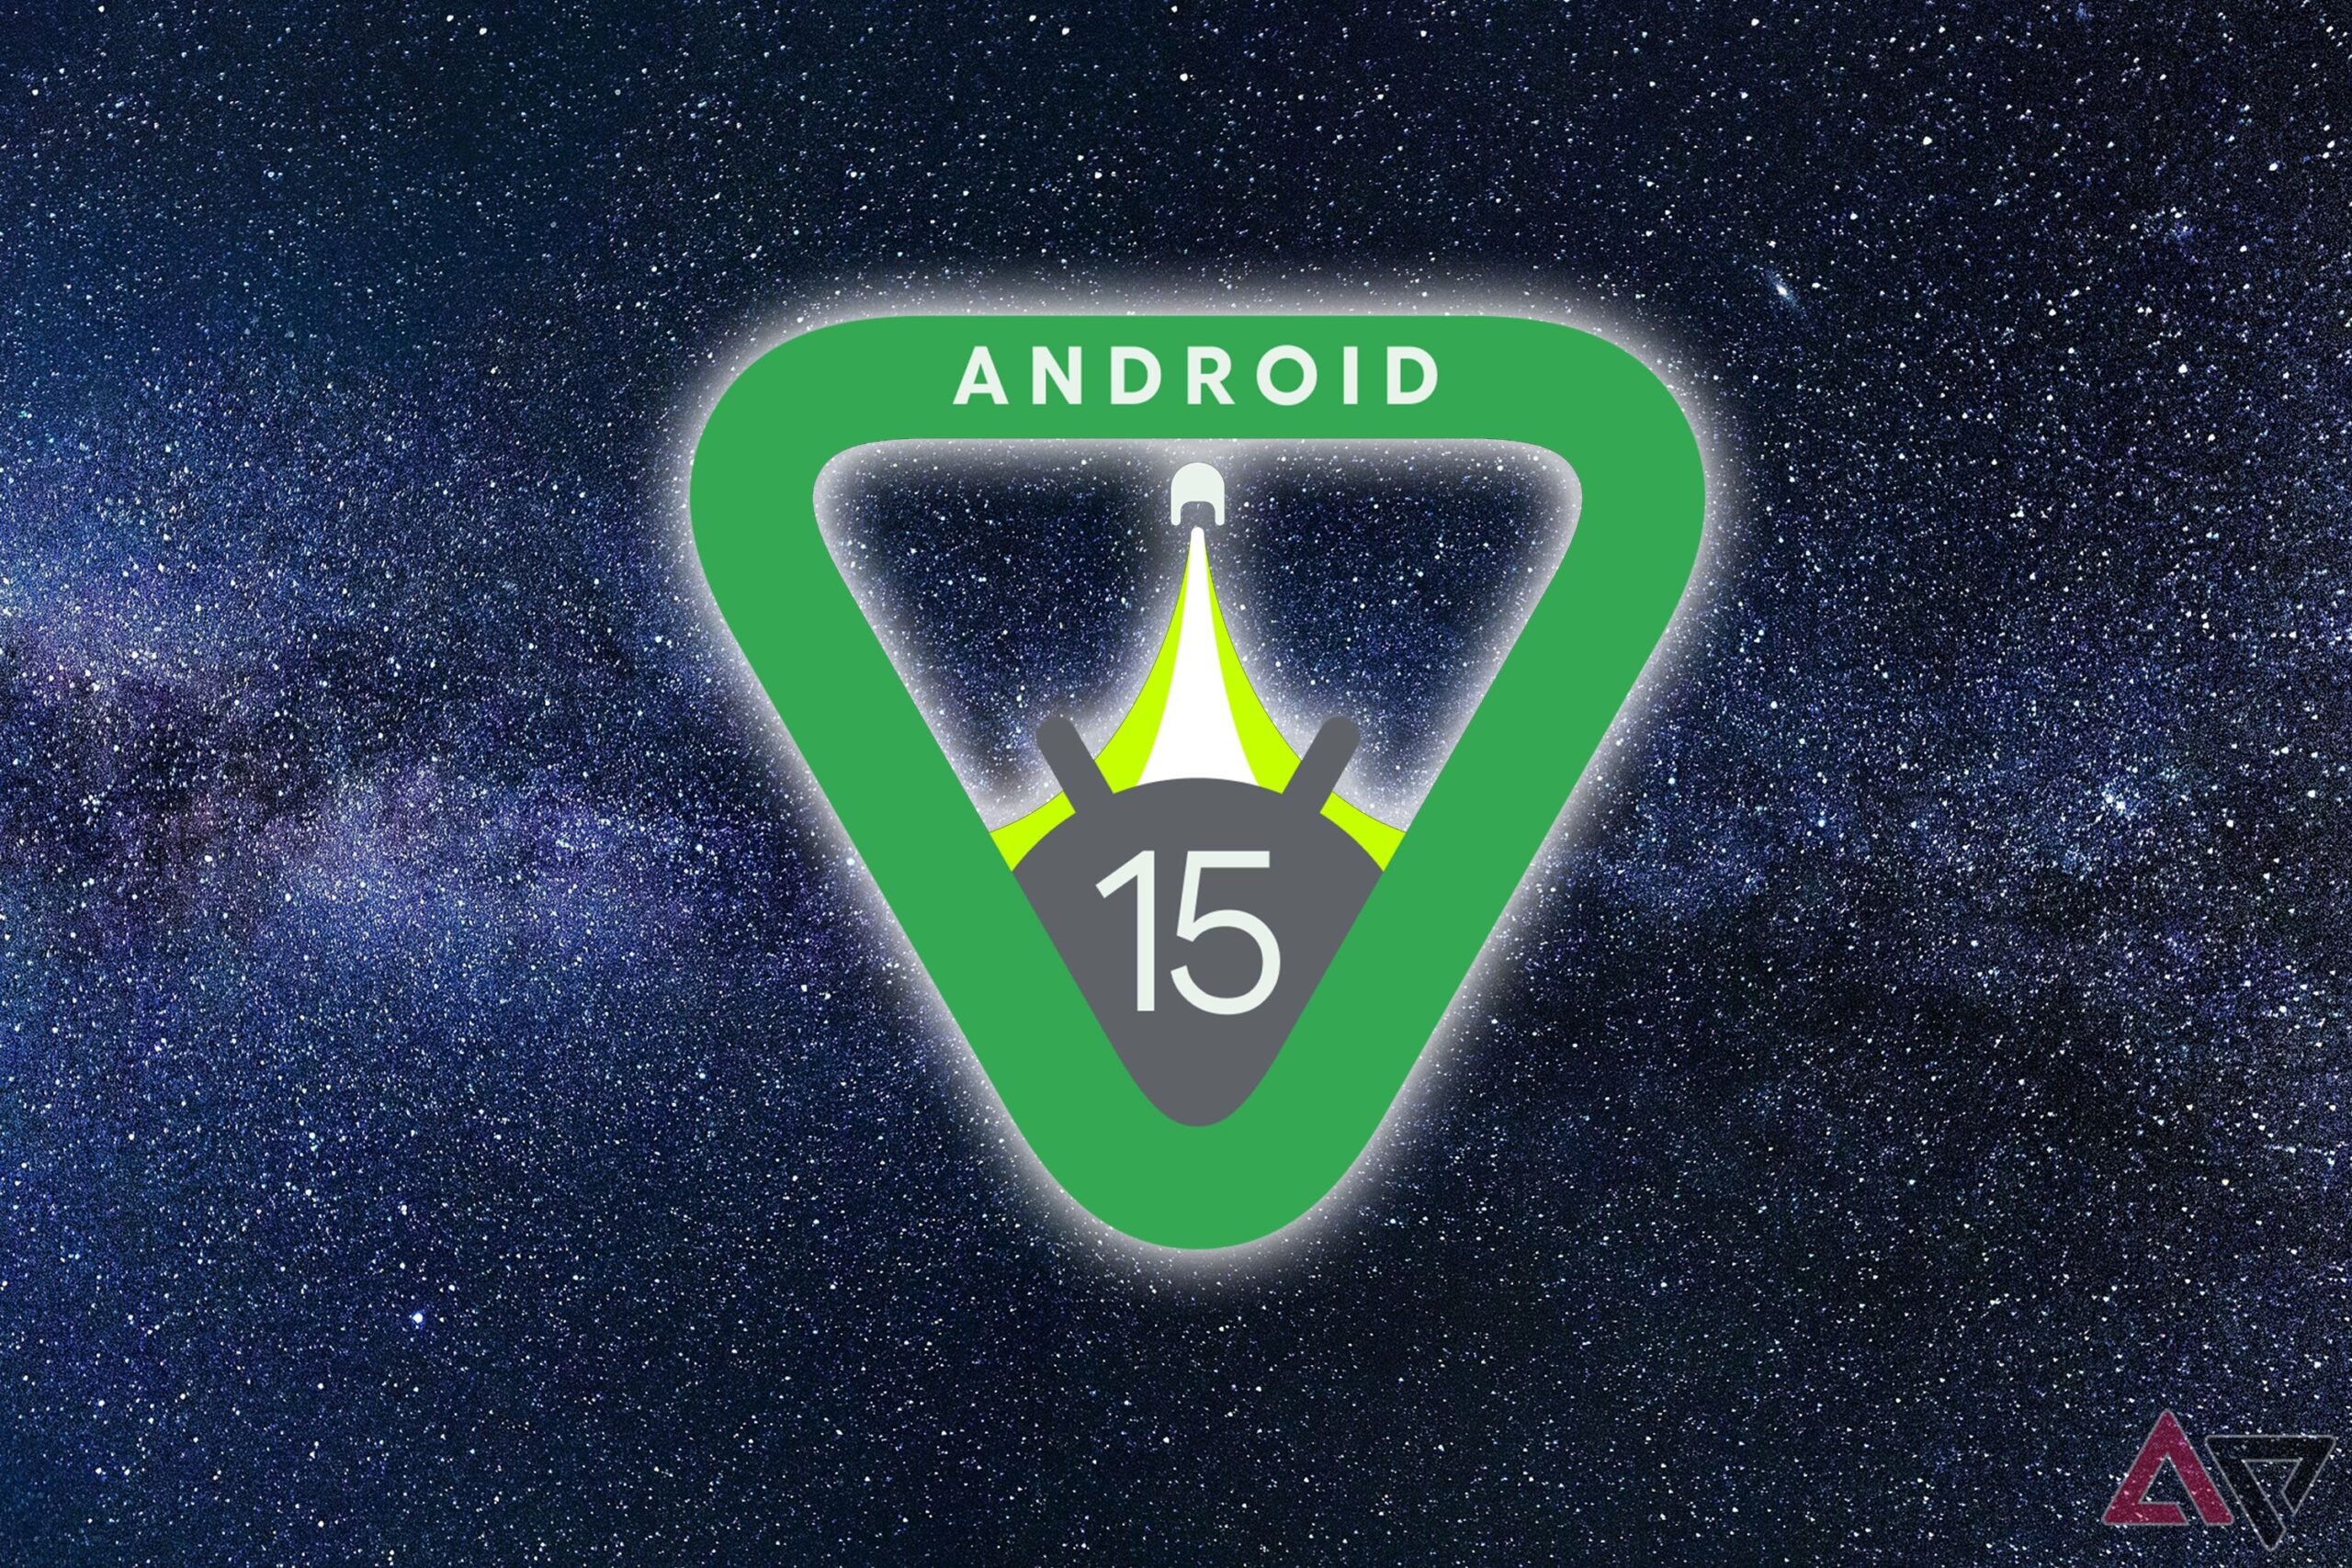 Android 15 is quietly shaping up to be a bigger deal than we thought